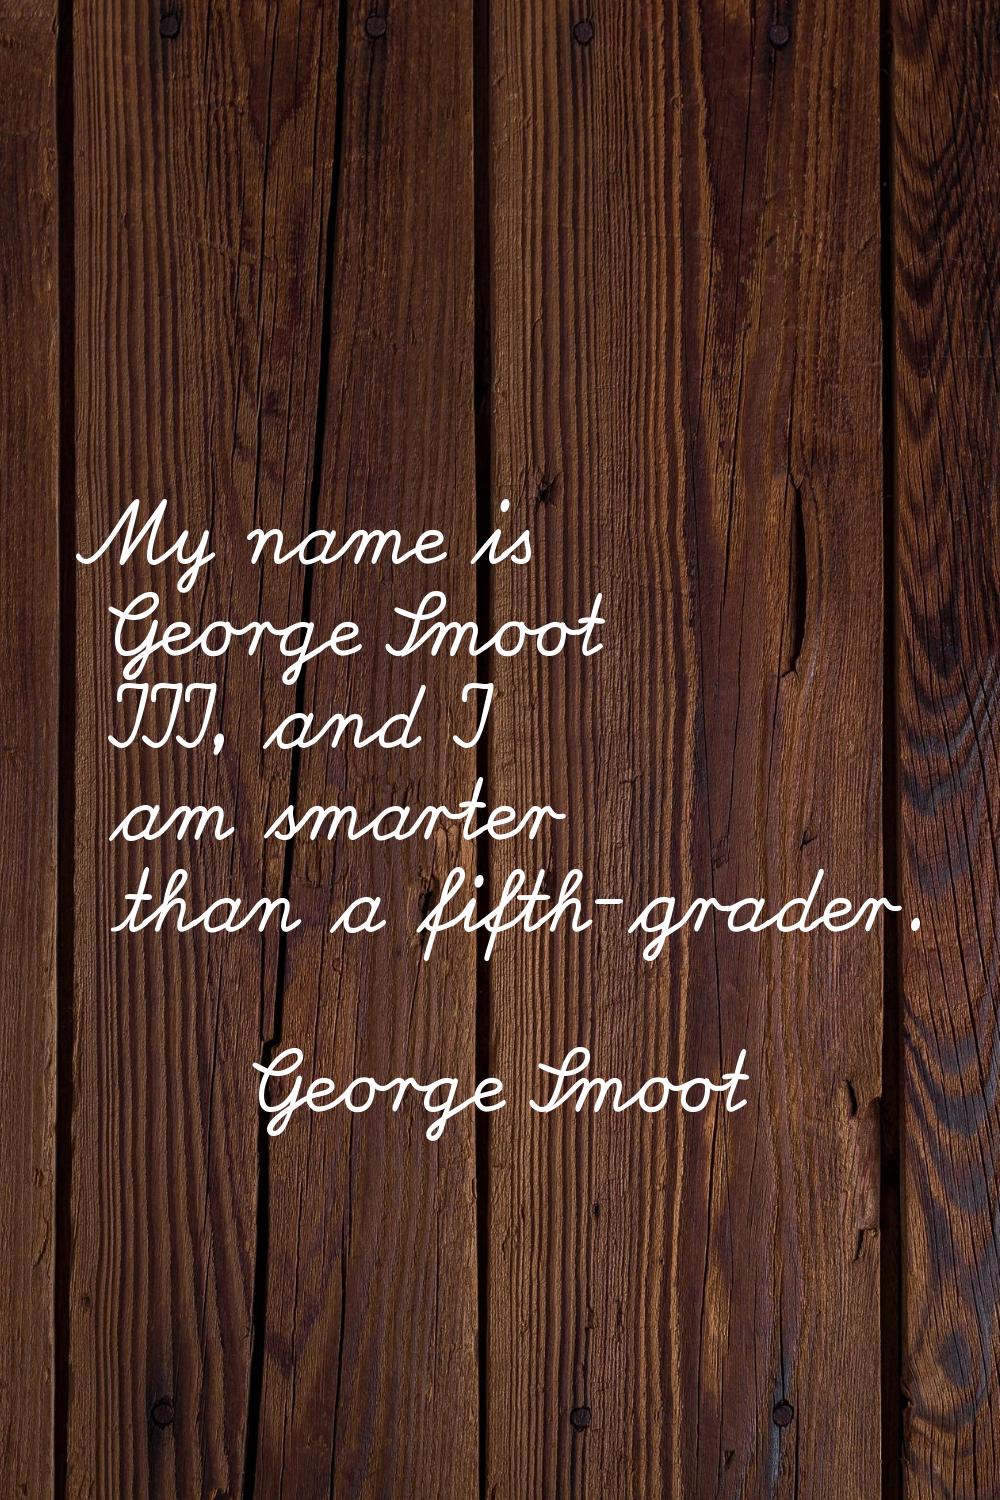 My name is George Smoot III, and I am smarter than a fifth-grader.